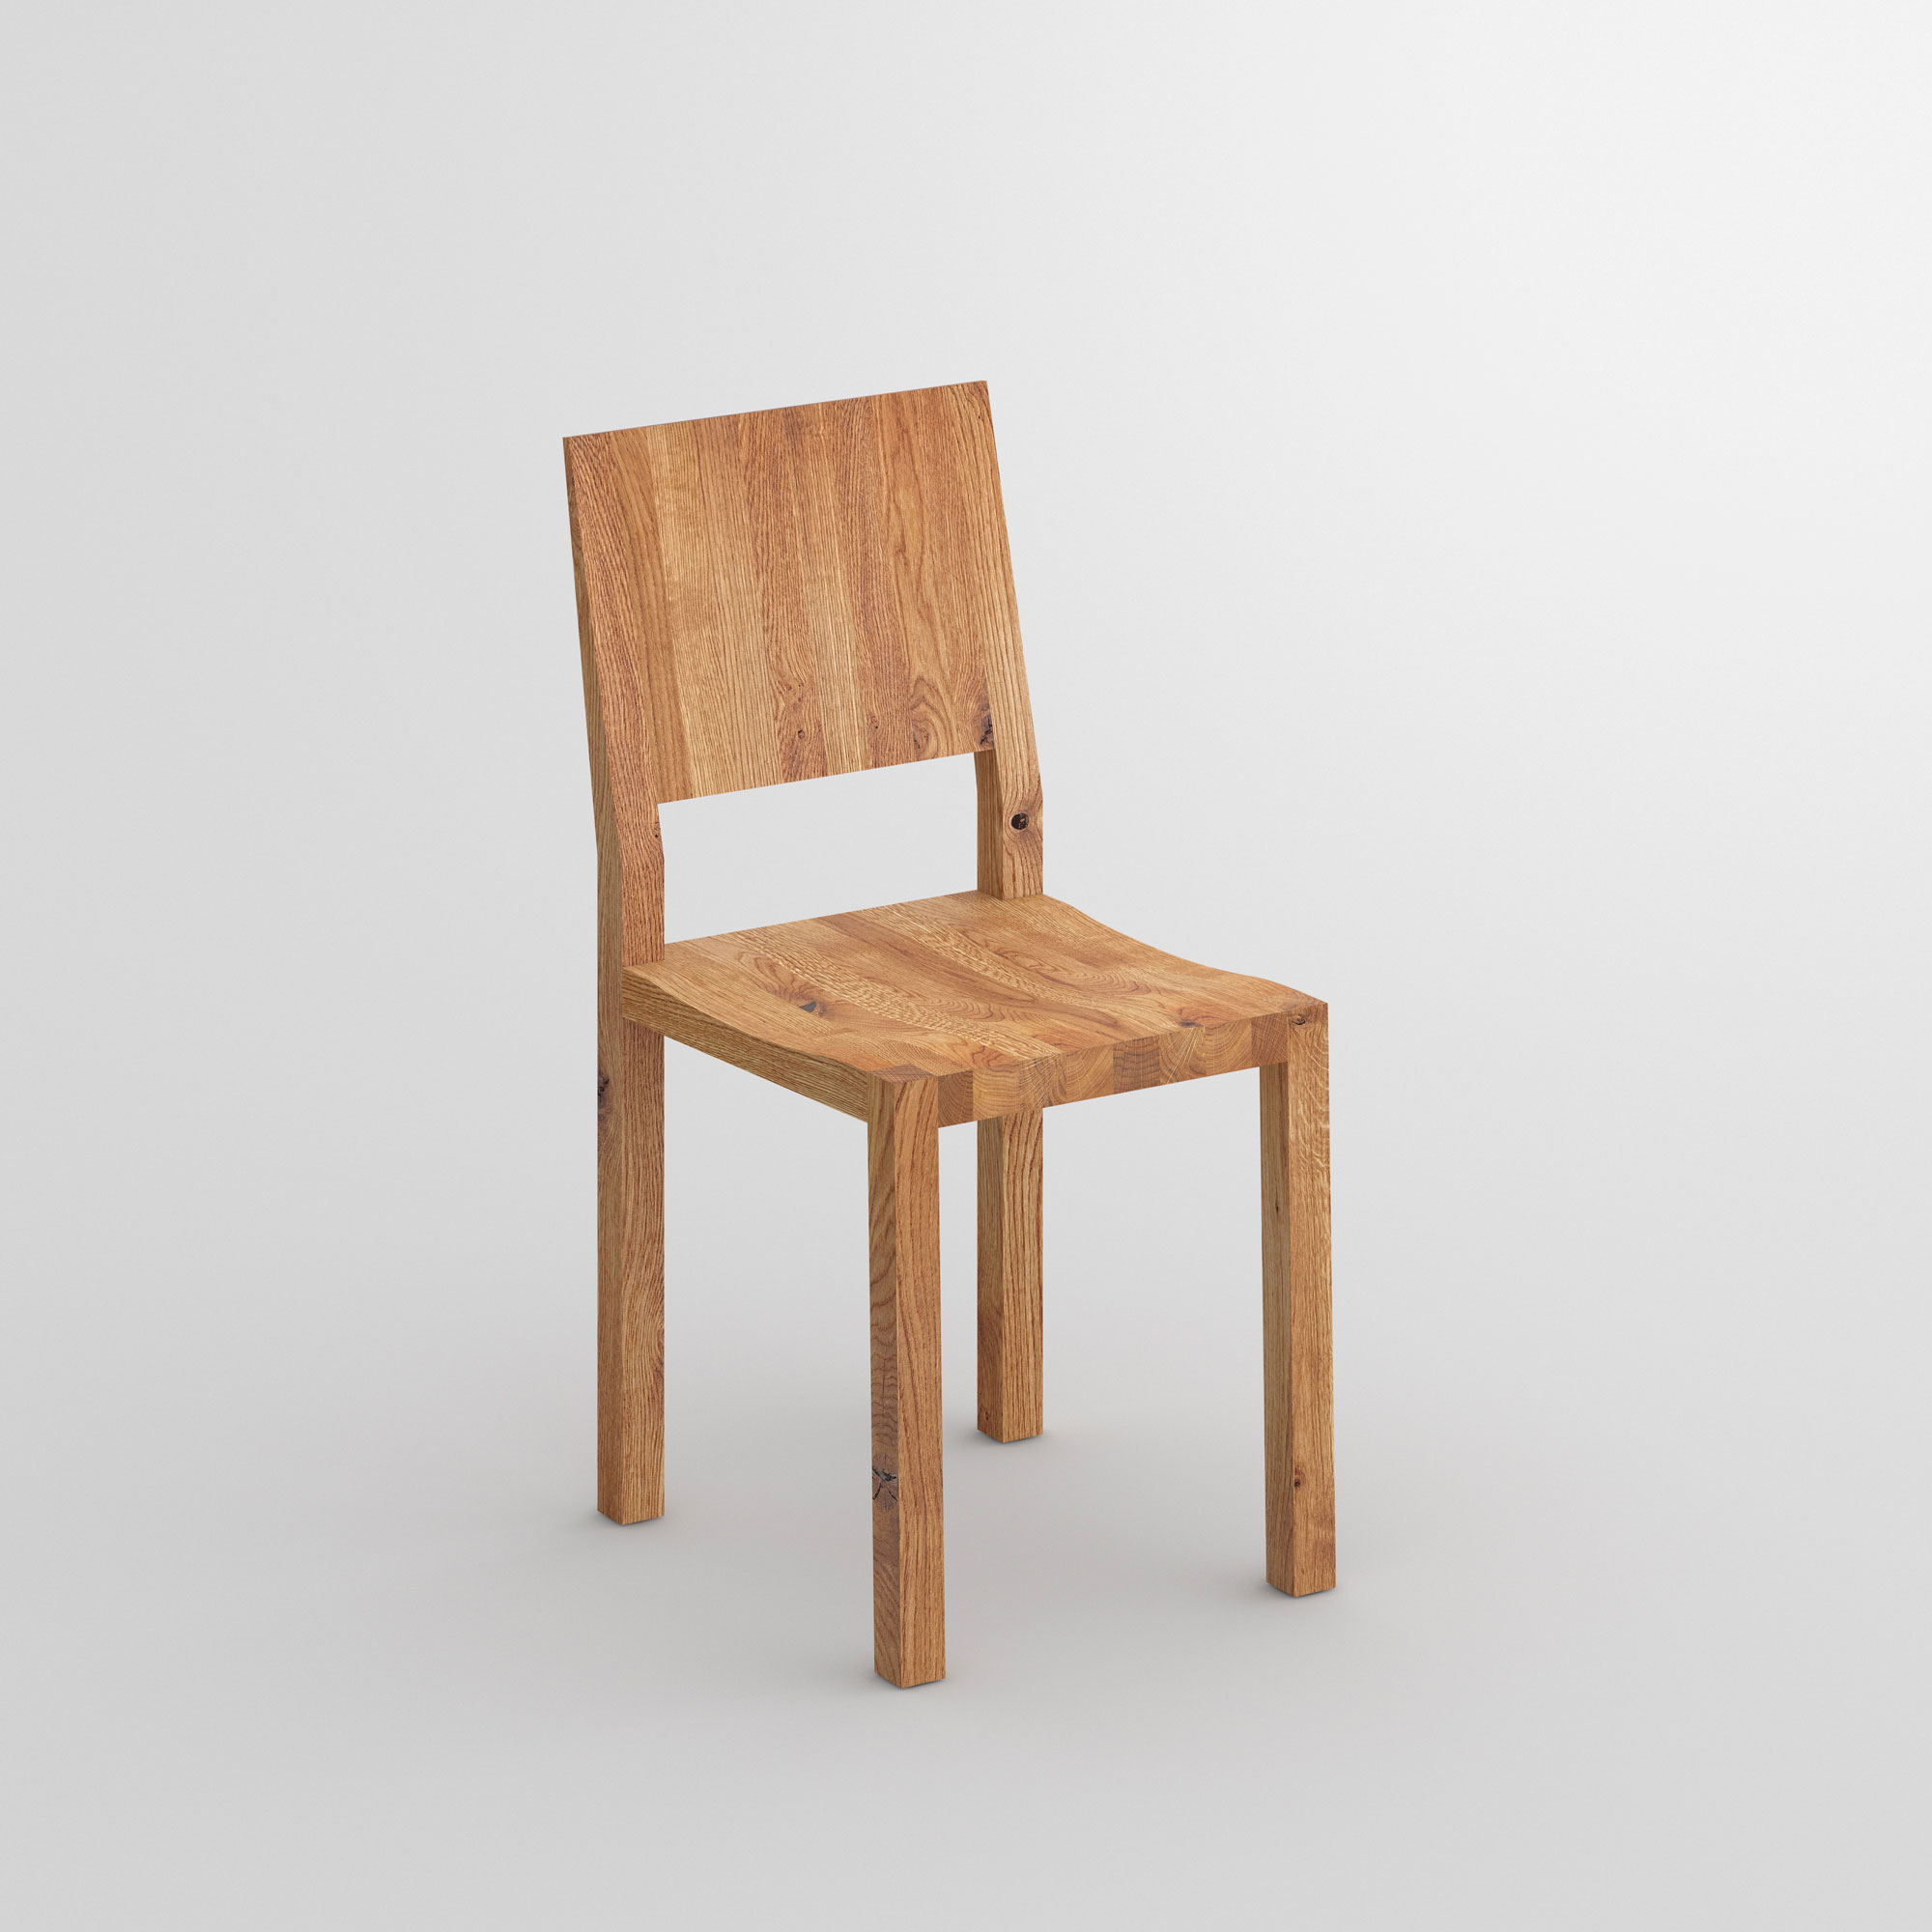 Solid Wood Chair TAU cam1 custom made in solid wood by vitamin design